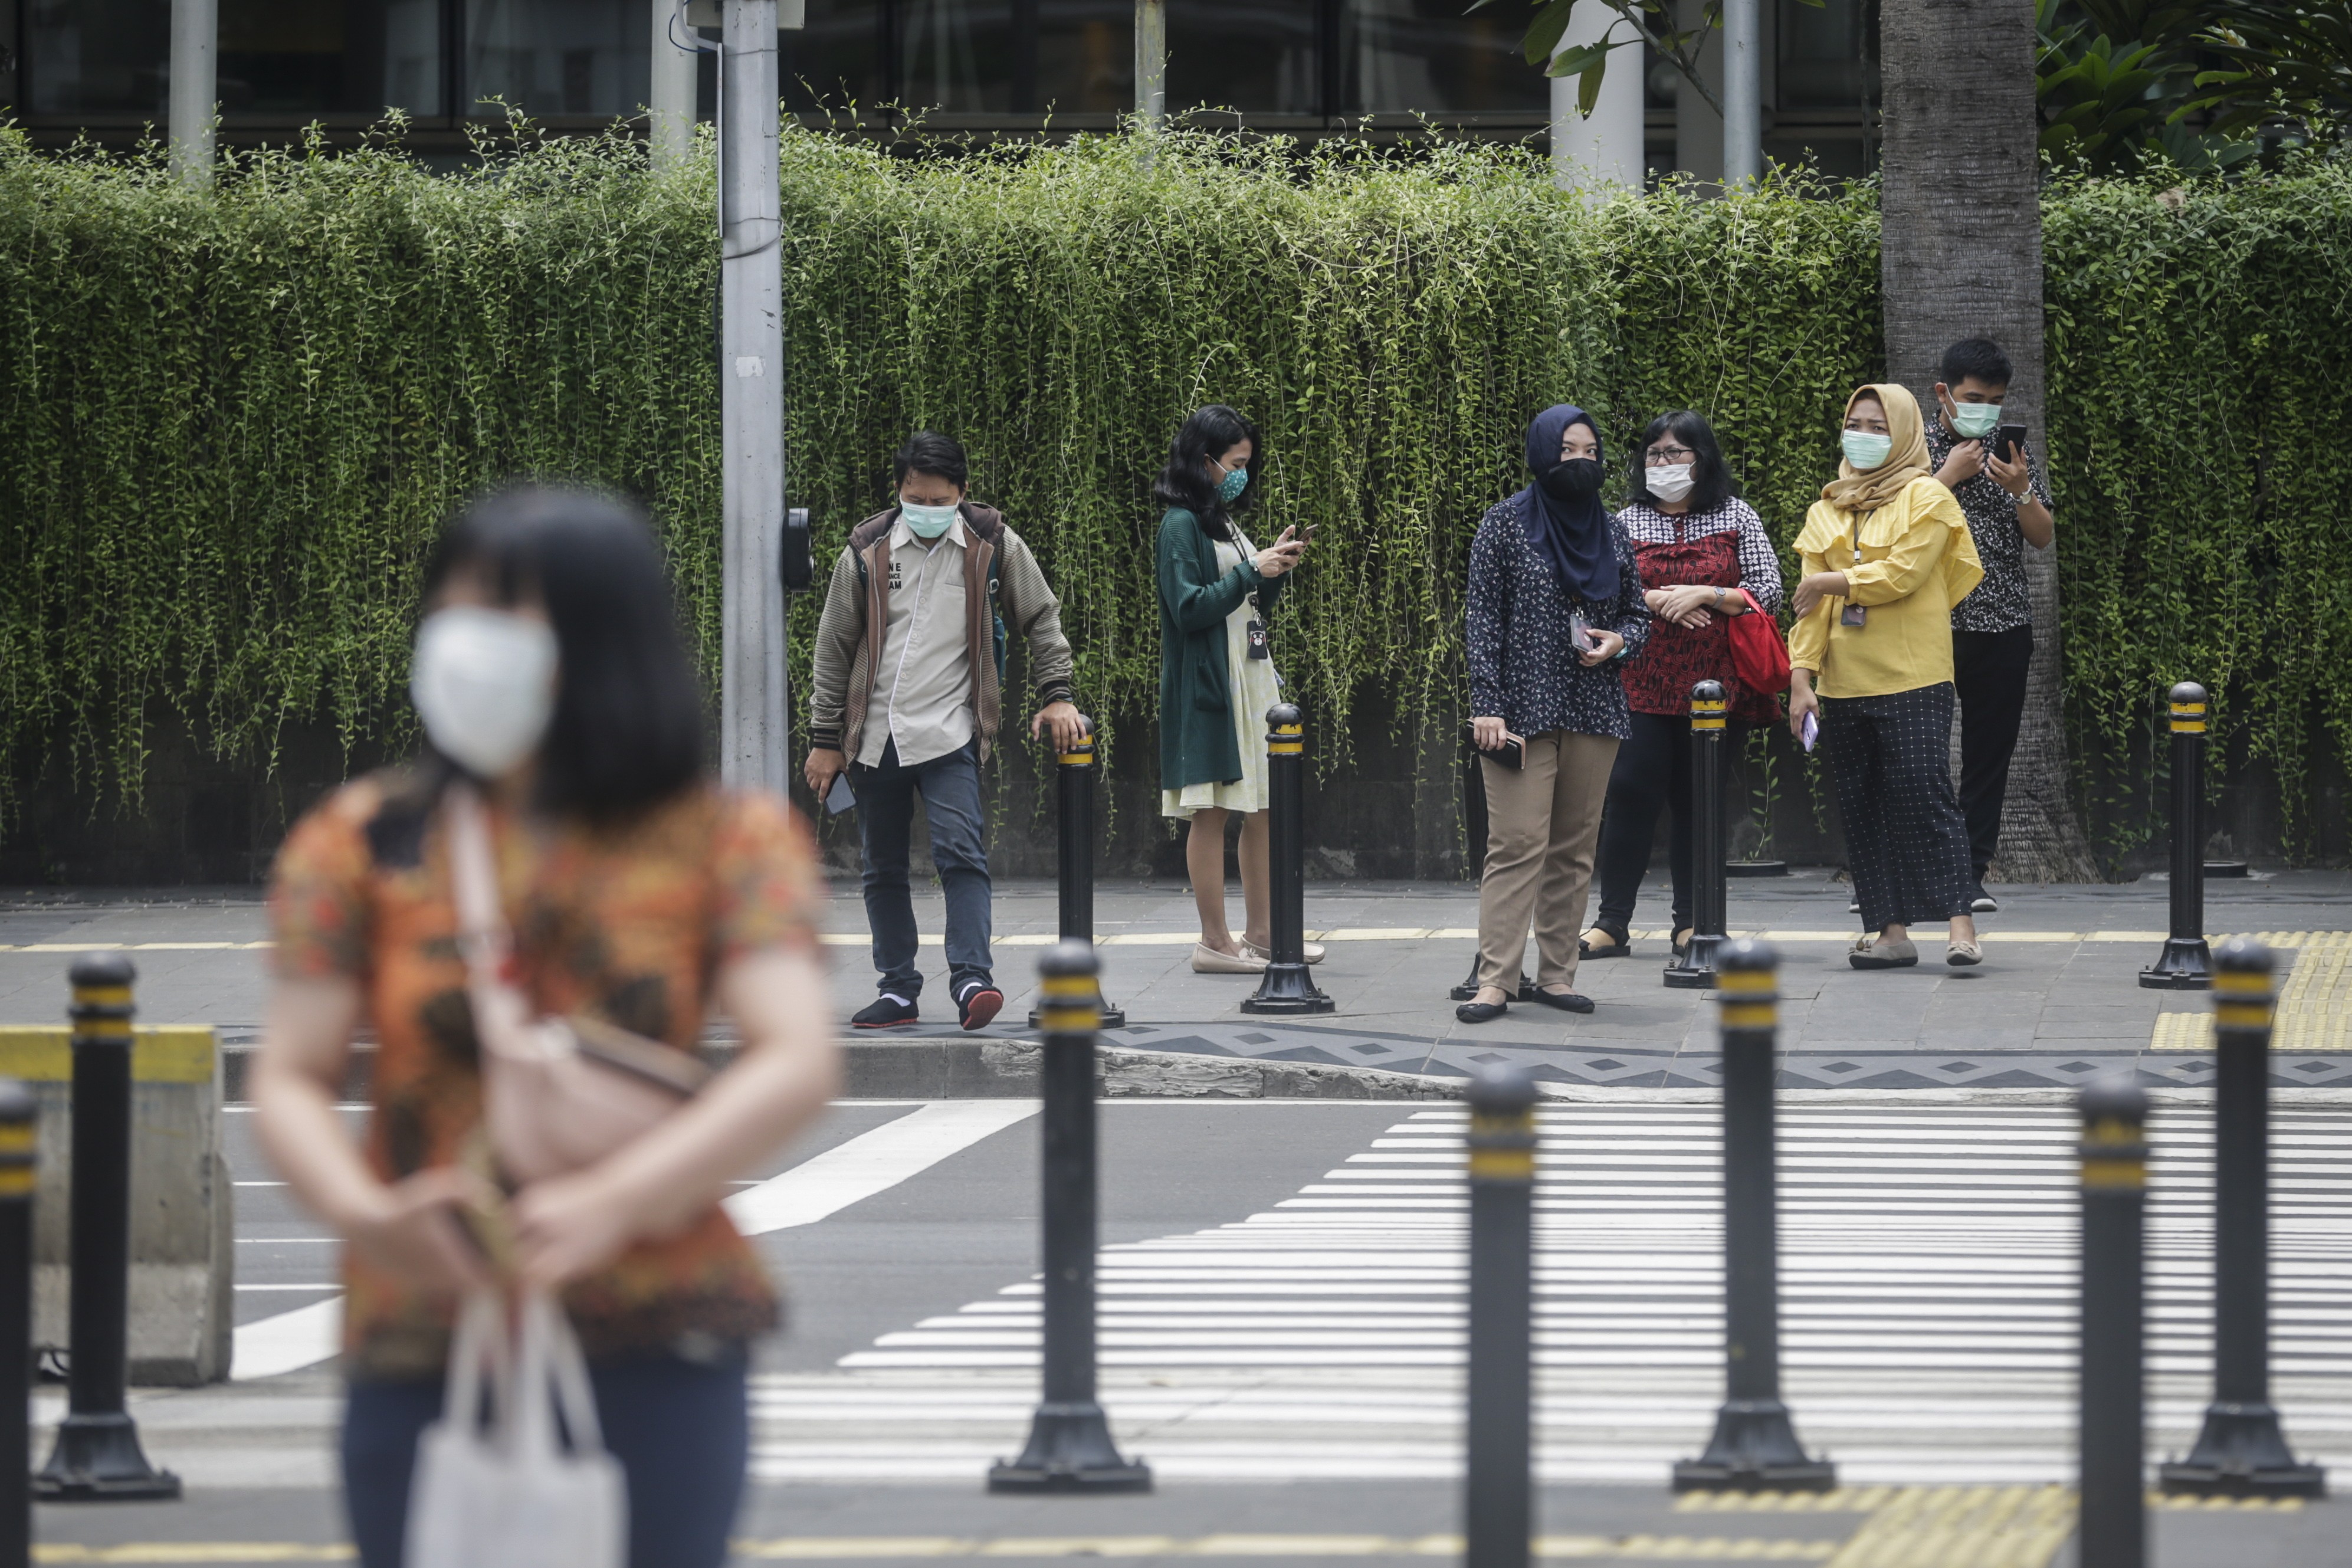 Indonesians wear protective face masks as they wait to cross the street in Jakarta. Authorities have urged people to avoid public gatherings, but many are still going to work, fearful that they might lose their jobs. Photo: EPA-EFE